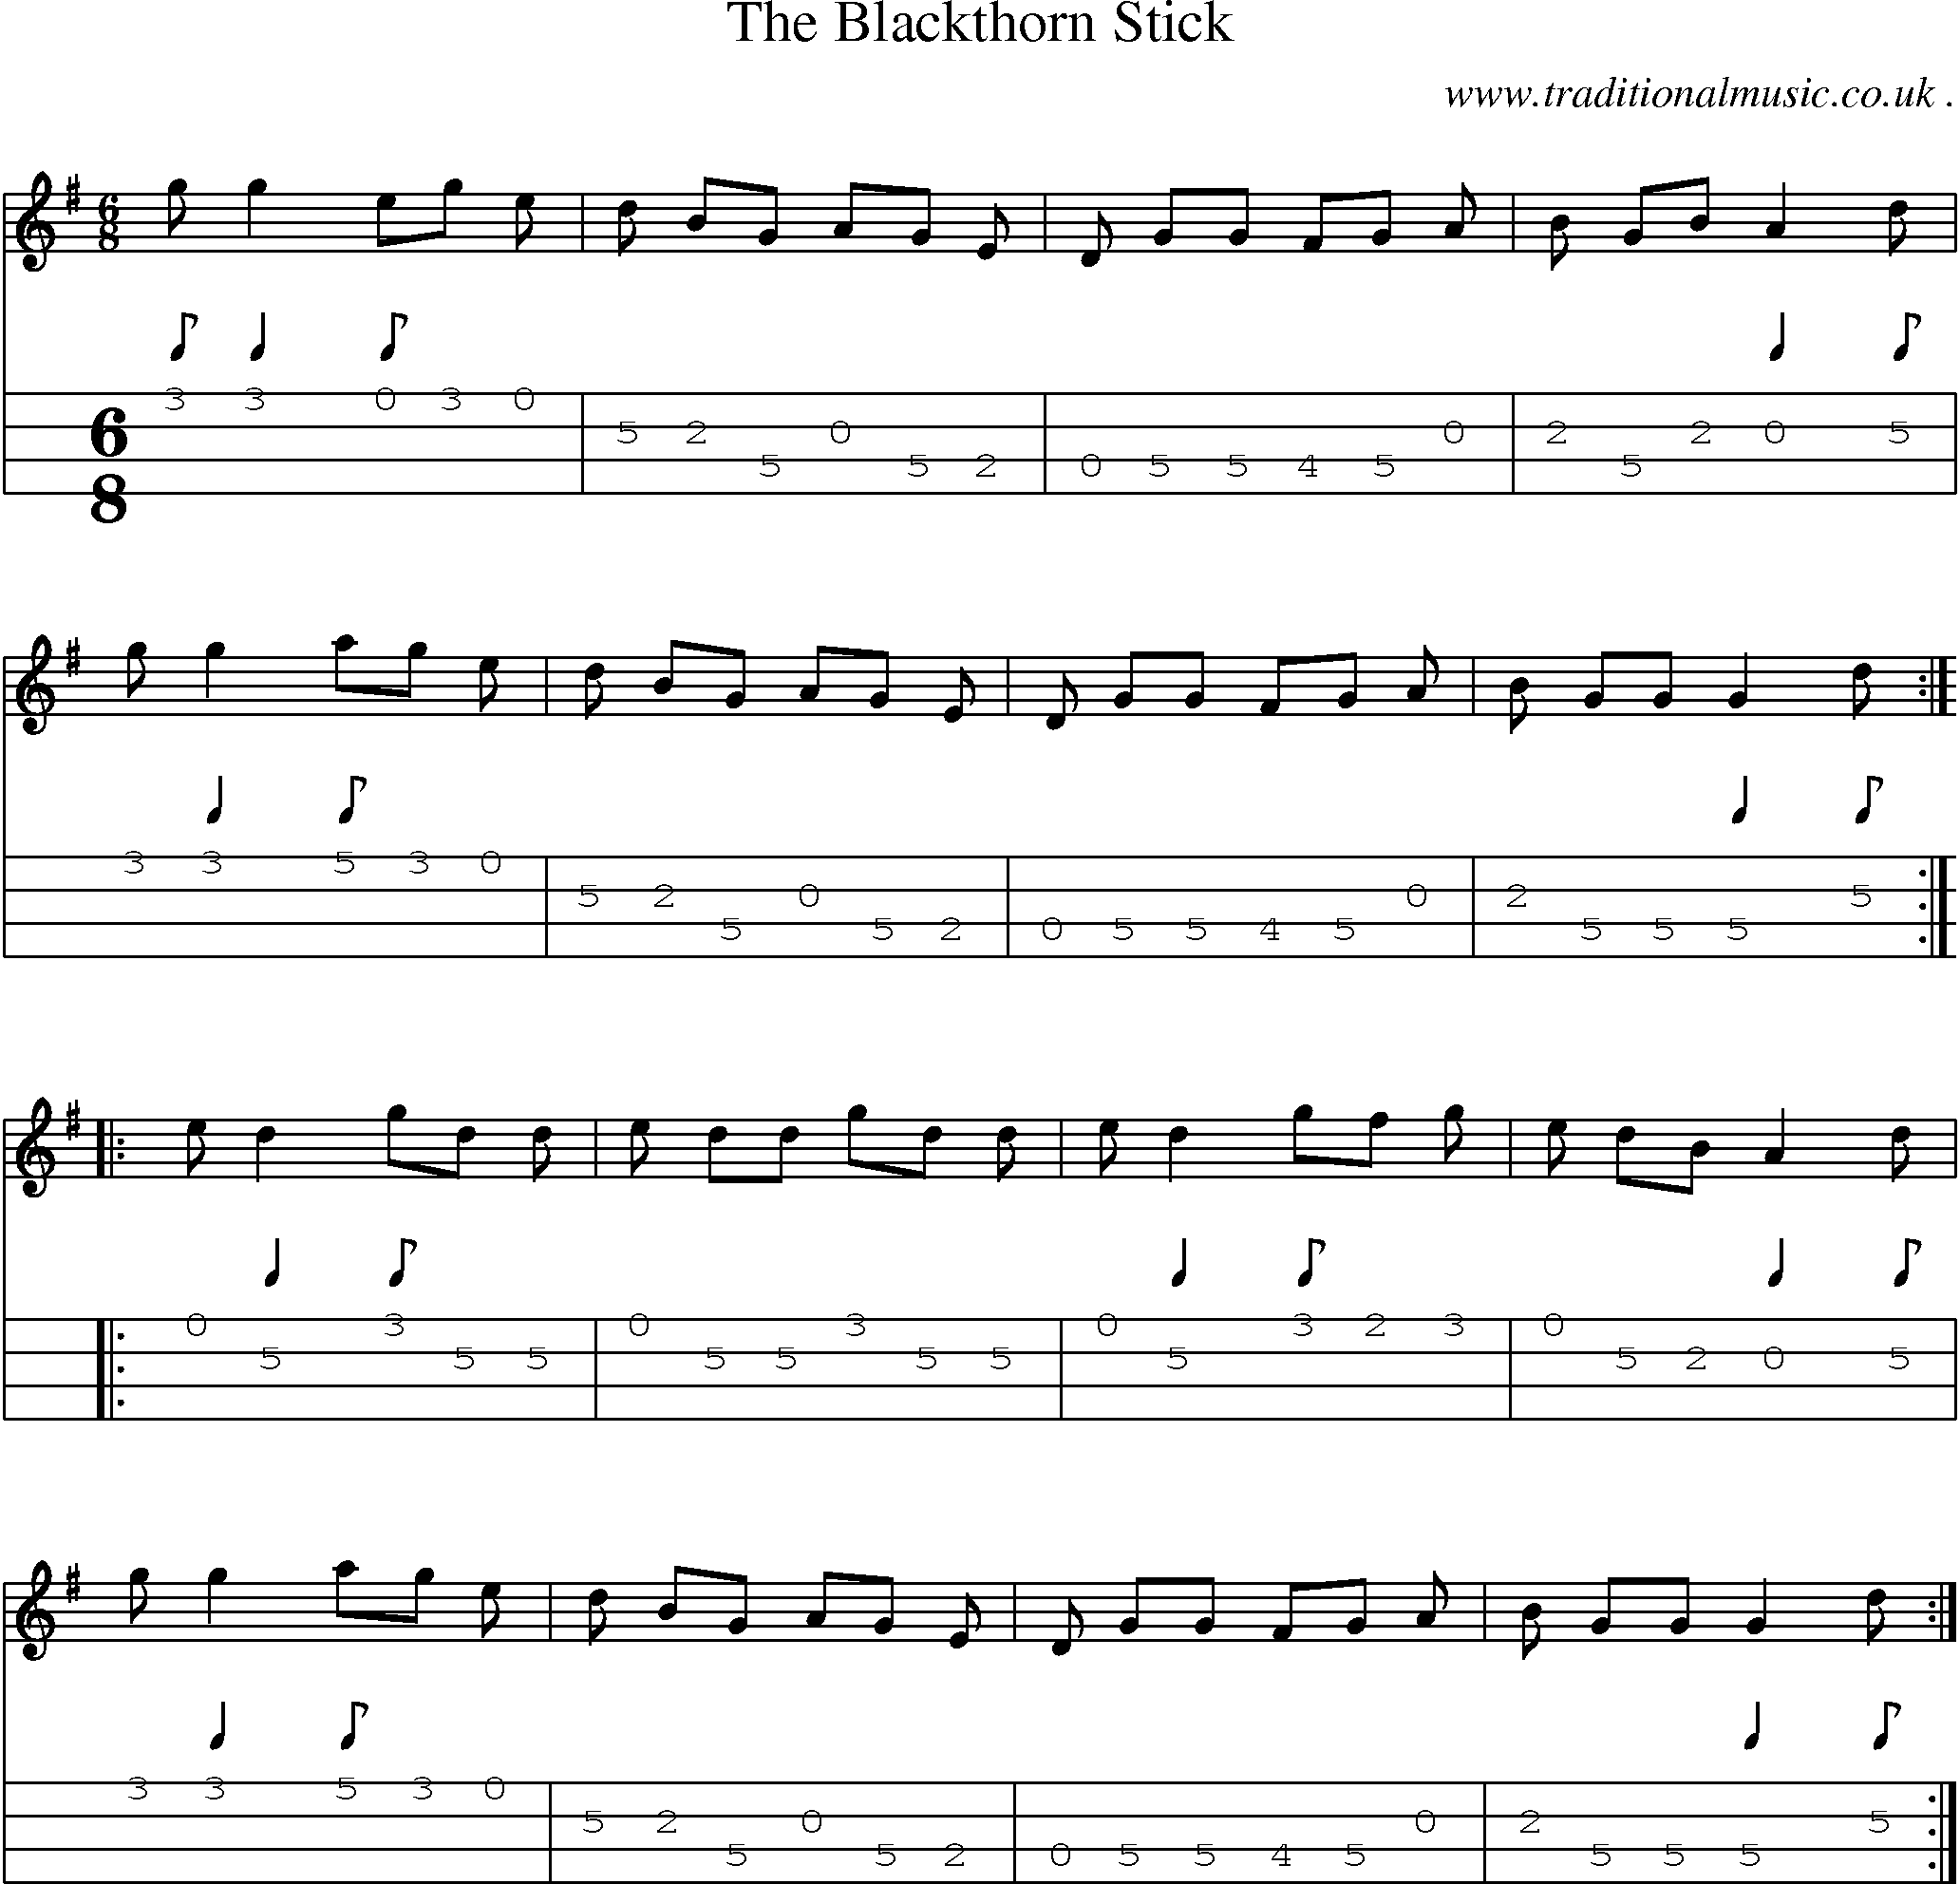 Sheet-Music and Mandolin Tabs for The Blackthorn Stick